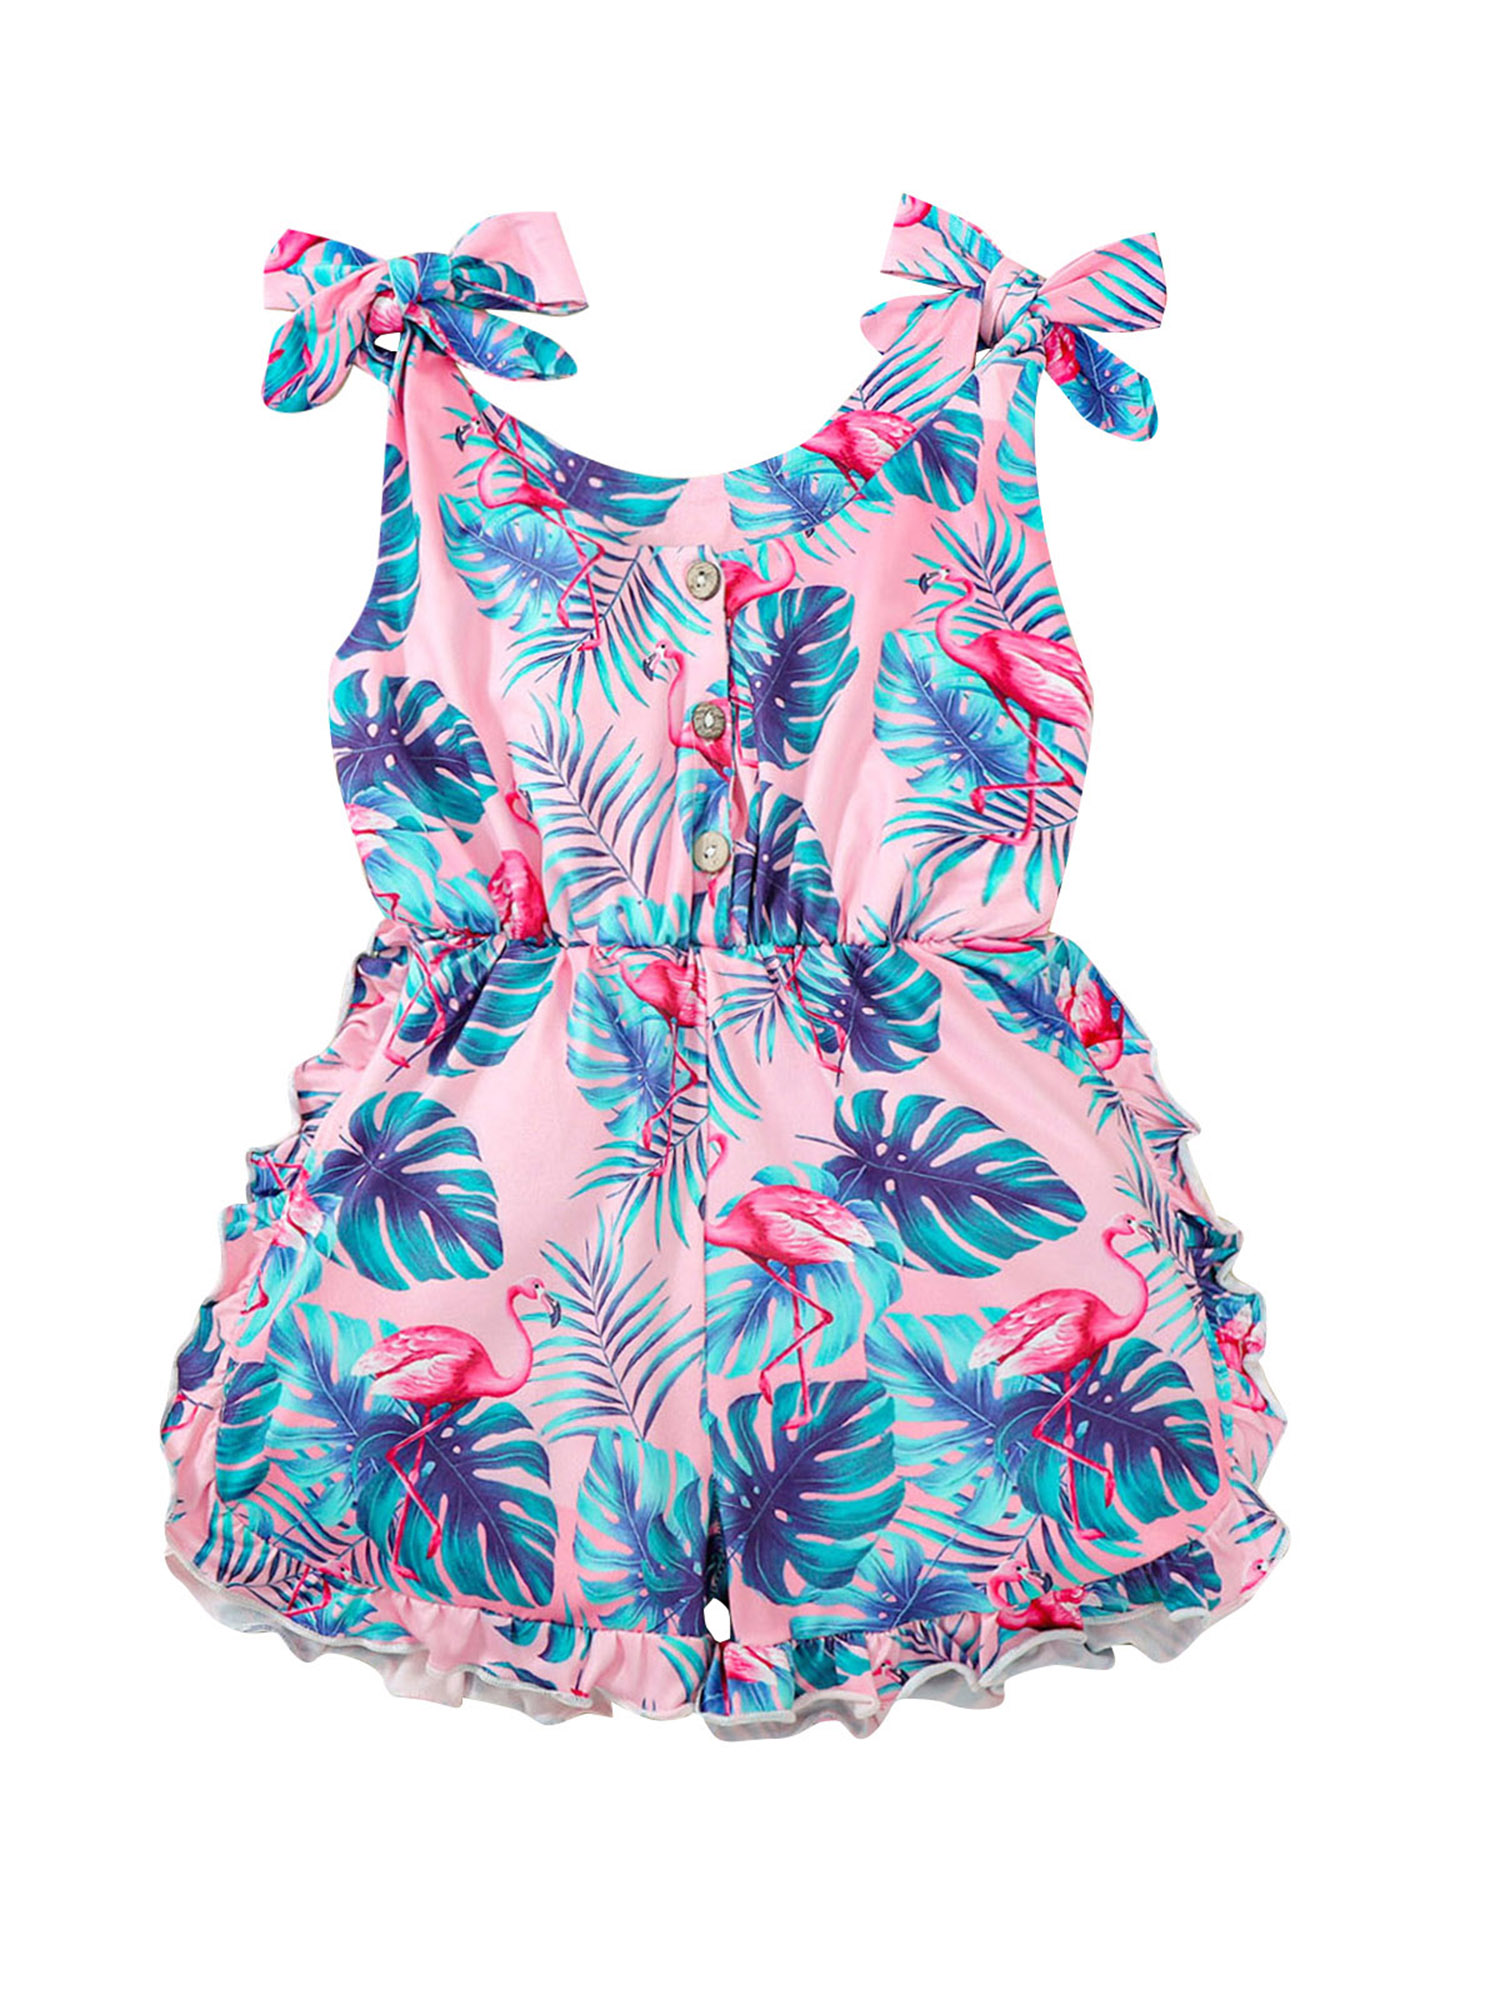 Thorn Tree Girls Sleeveless Jumpsuit Bowknot Strap Button Closure Flamingo Romper Toddler Girls Clothes